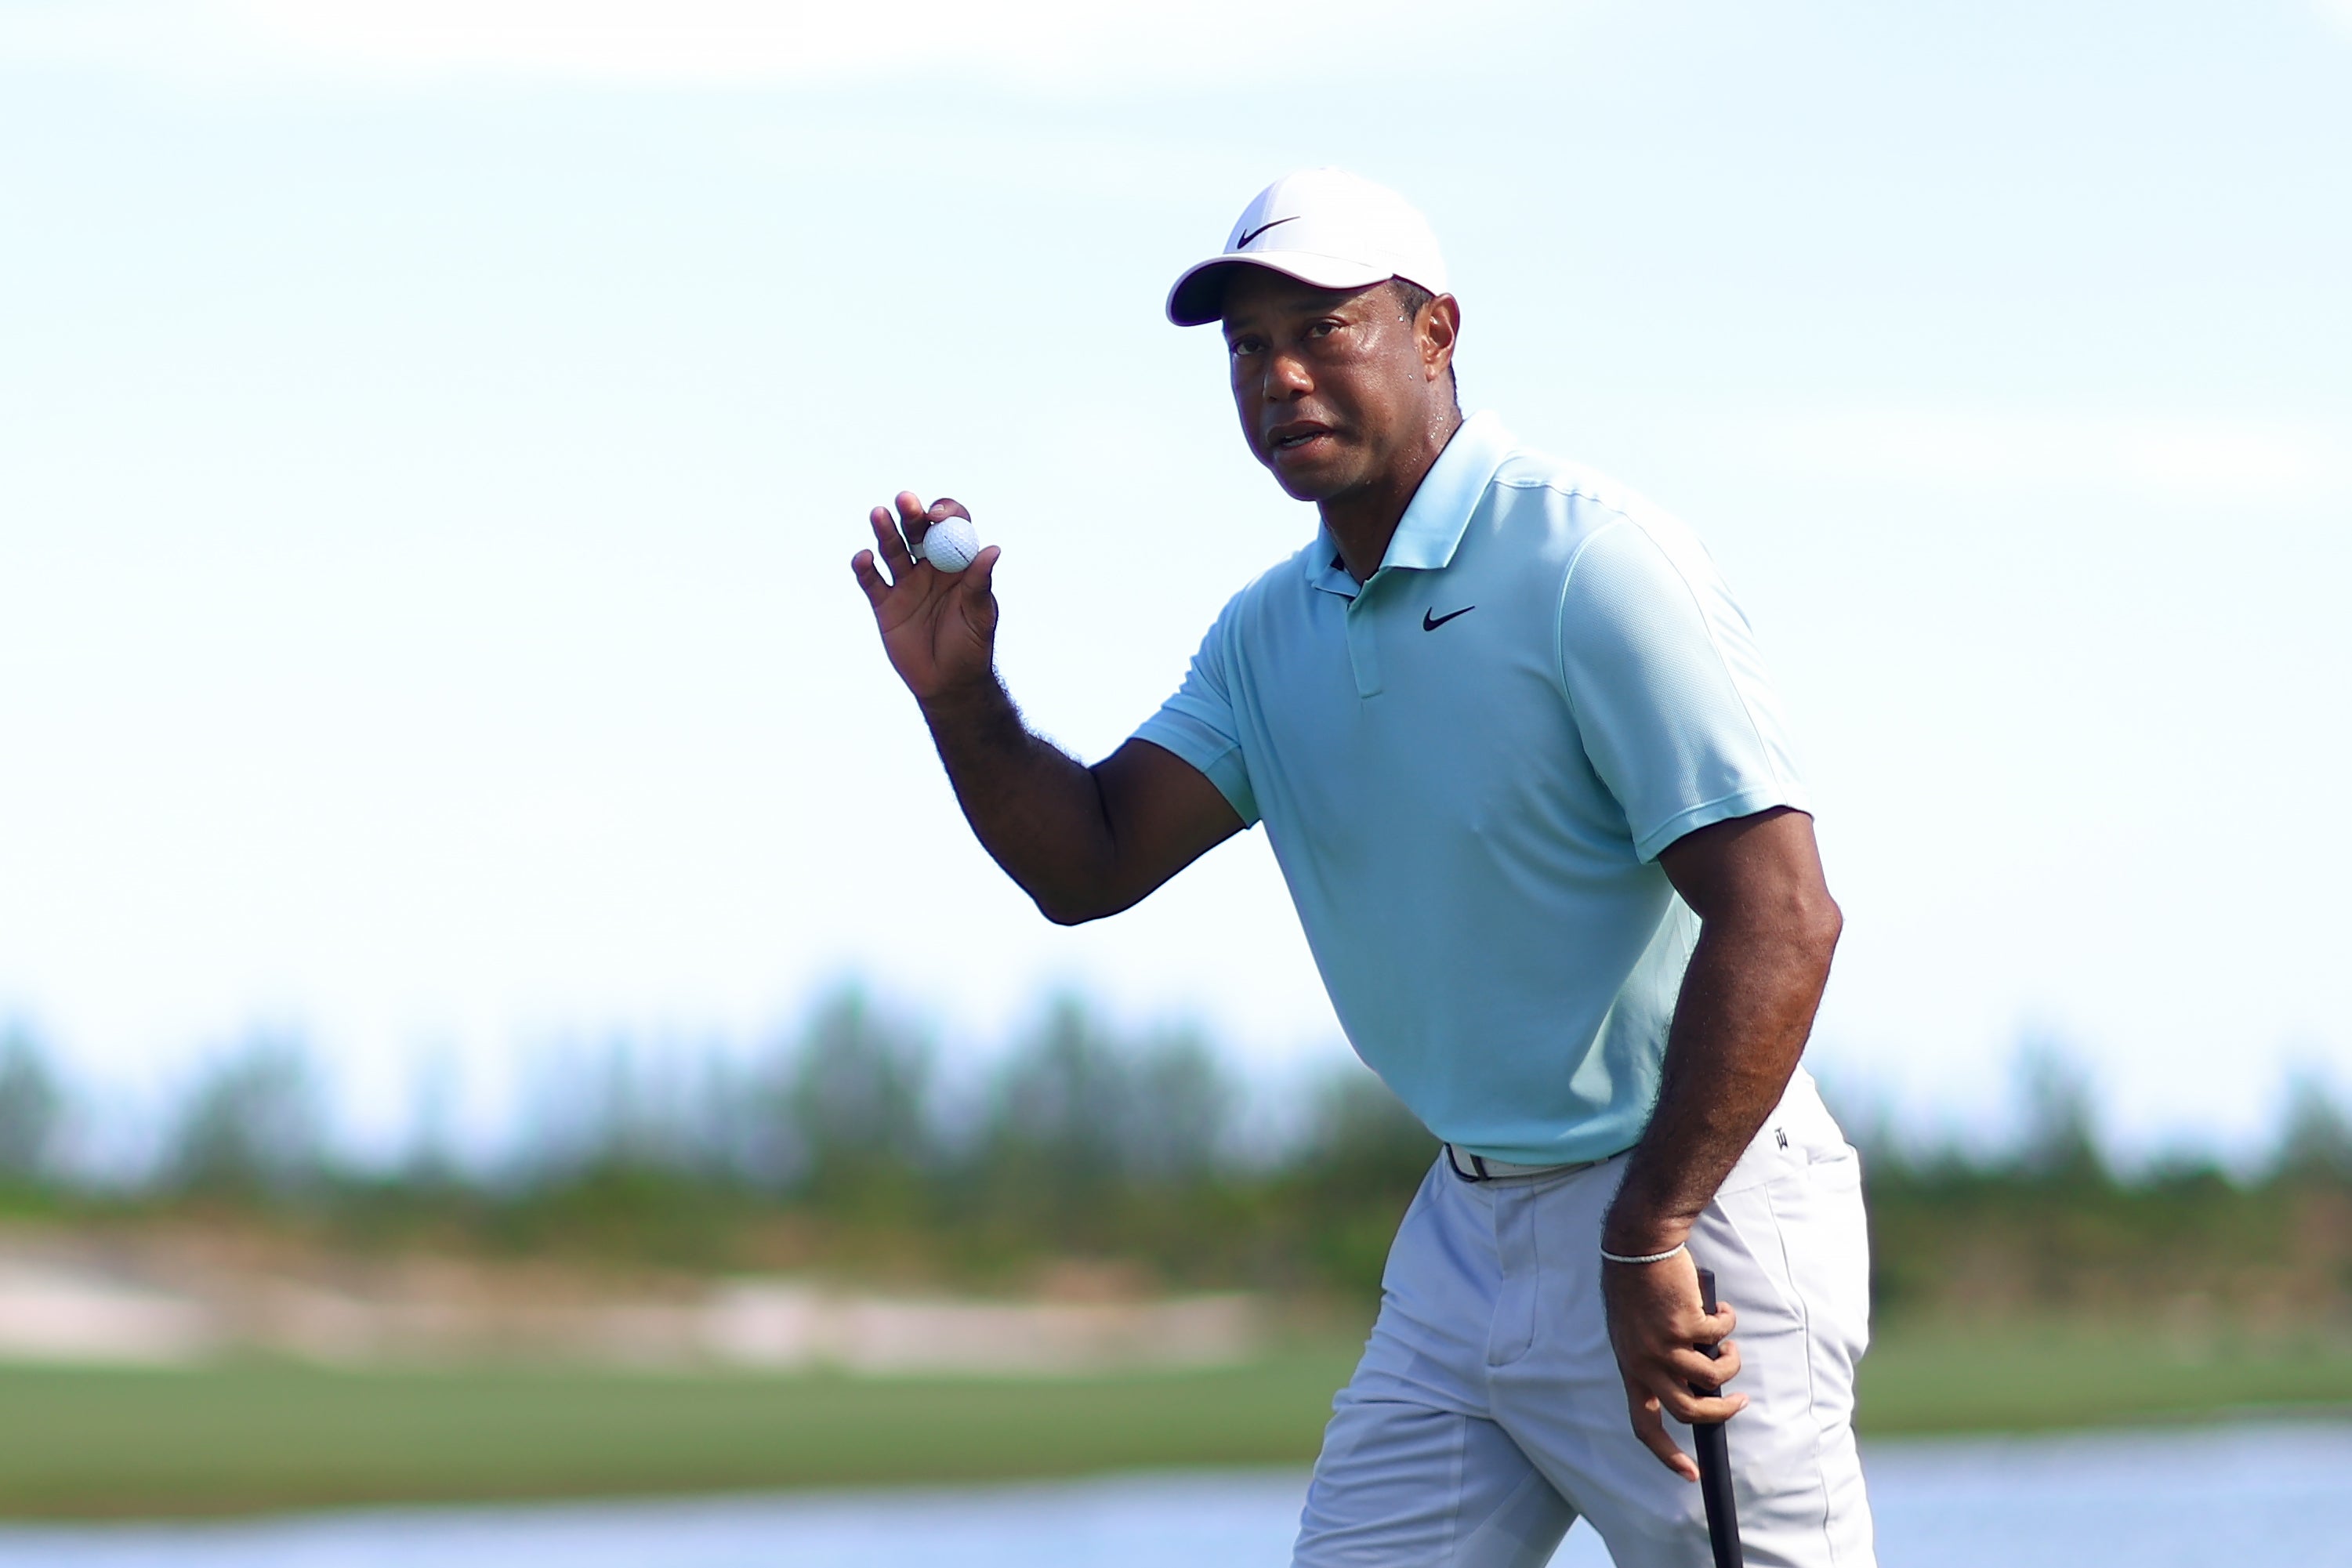 Tiger Woods reflects on recovery as Scottie Scheffler leads Hero World